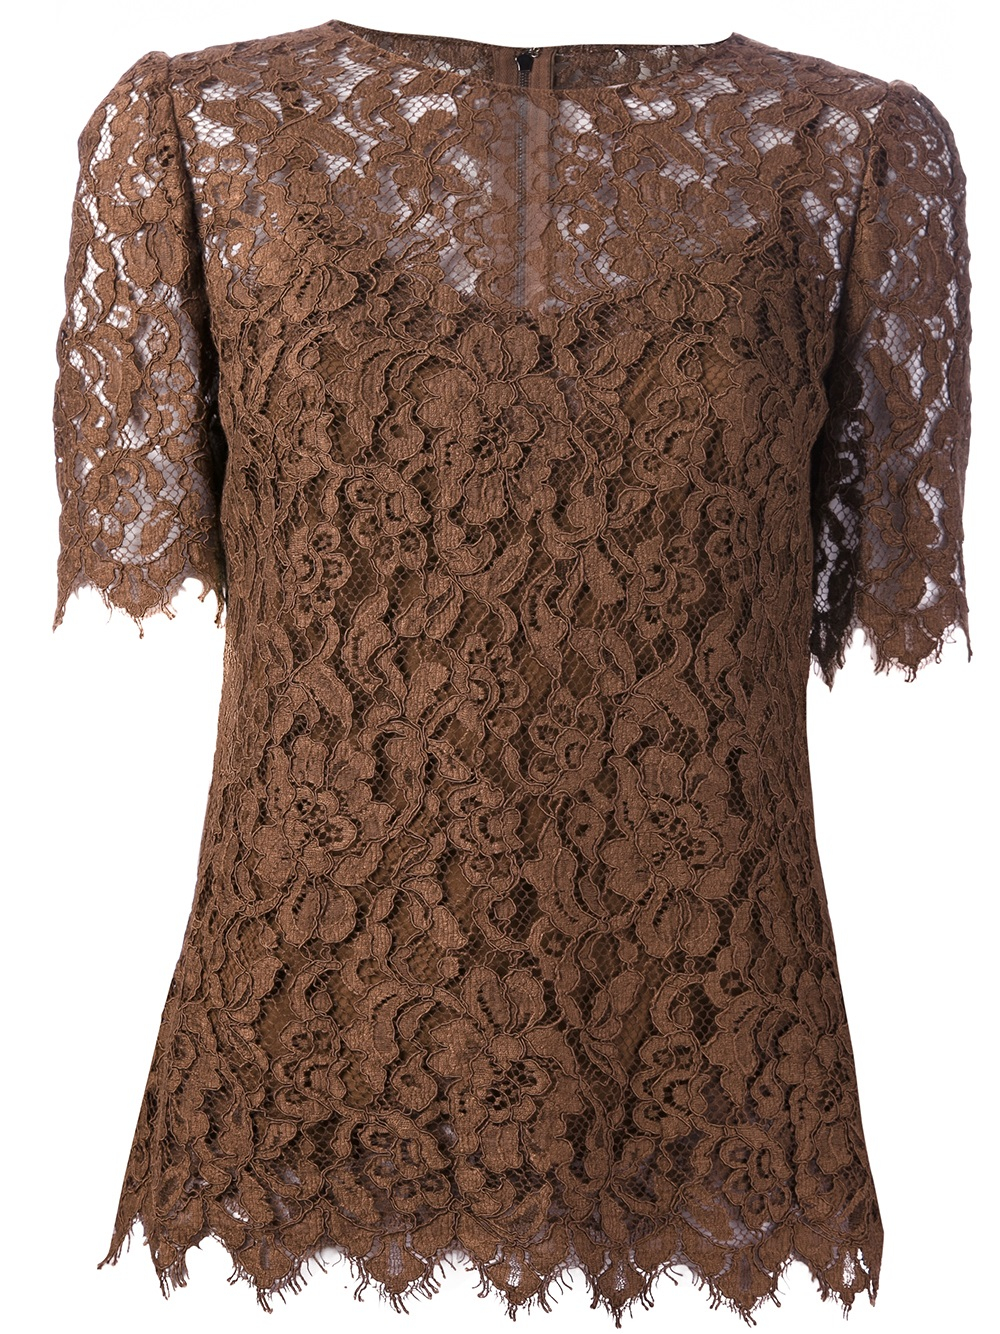 Lyst - Dolce & gabbana Lace Blouse in Brown